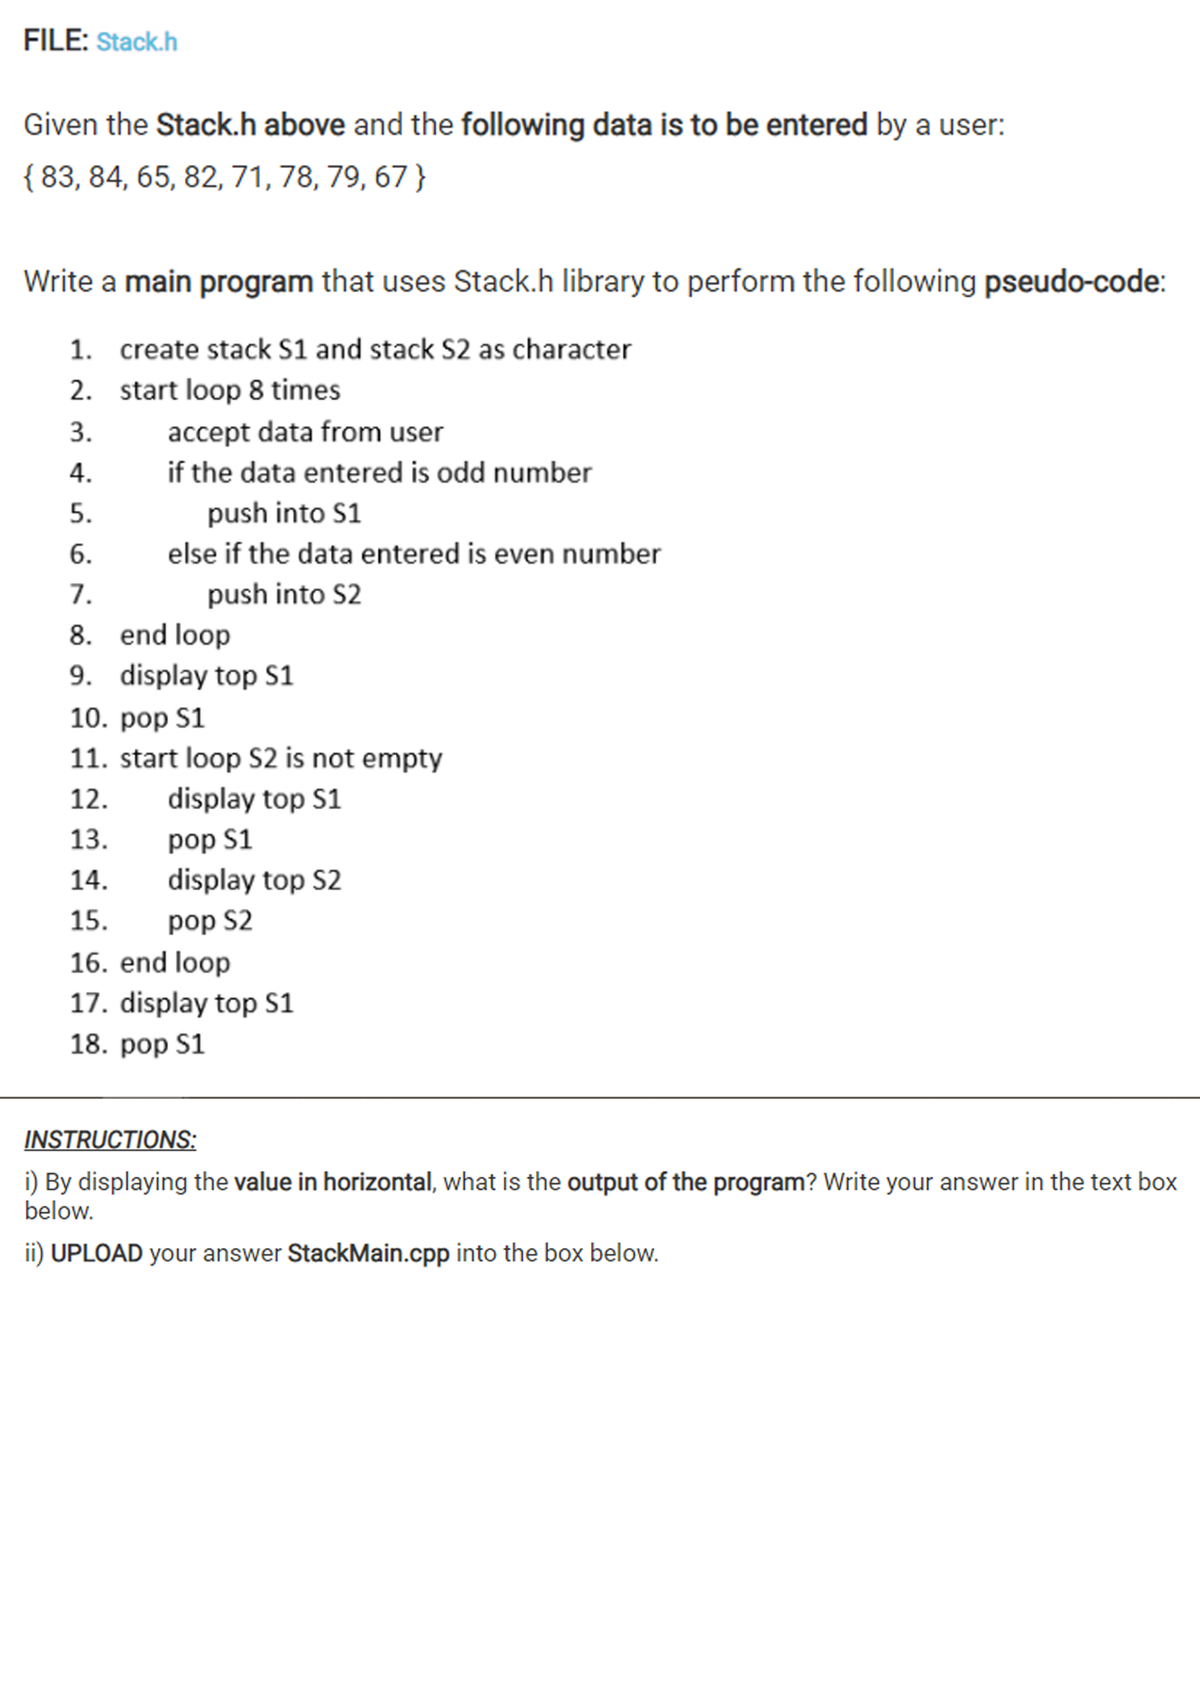 FILE: Stack.h
Given the Stack.h above and the following data is to be entered by a user:
{ 83, 84, 65, 82, 71, 78, 79, 67 }
Write a main program that uses Stack.h library to perform the following pseudo-code:
1. create stack S1 and stack S2 as character
2. start loop 8 times
3.
accept data from user
4.
if the data entered is odd number
5.
push into S1
6.
else if the data entered is even number
7.
push into S2
8. end loop
9. display top S1
10. роp S1
11. start loop S2 is not empty
12.
display top S1
13.
pop S1
14.
display top S2
15.
pop S2
16. end loop
17. display top S1
18. роp S1
INSTRUCTIONS:
i) By displaying the value in horizontal, what is the output of the program? Write your answer in the text box
below.
ii) UPLOAD your answer StackMain.cpp into the box below.
